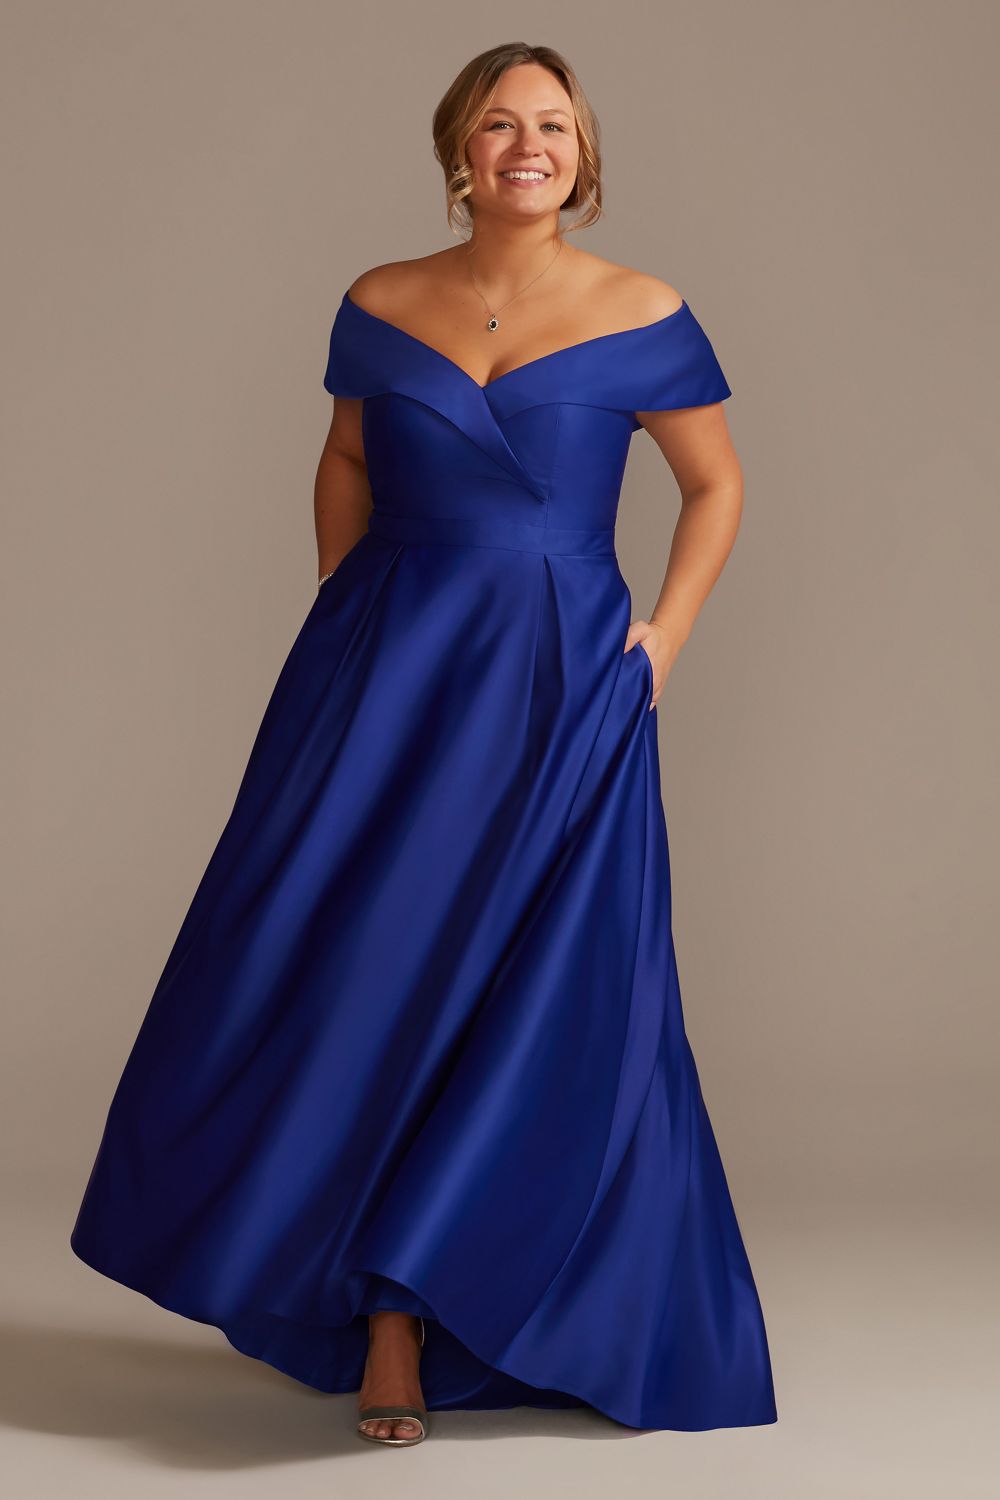 royal blue sweetheart off-the-shoulder satin ball gown wedding dress